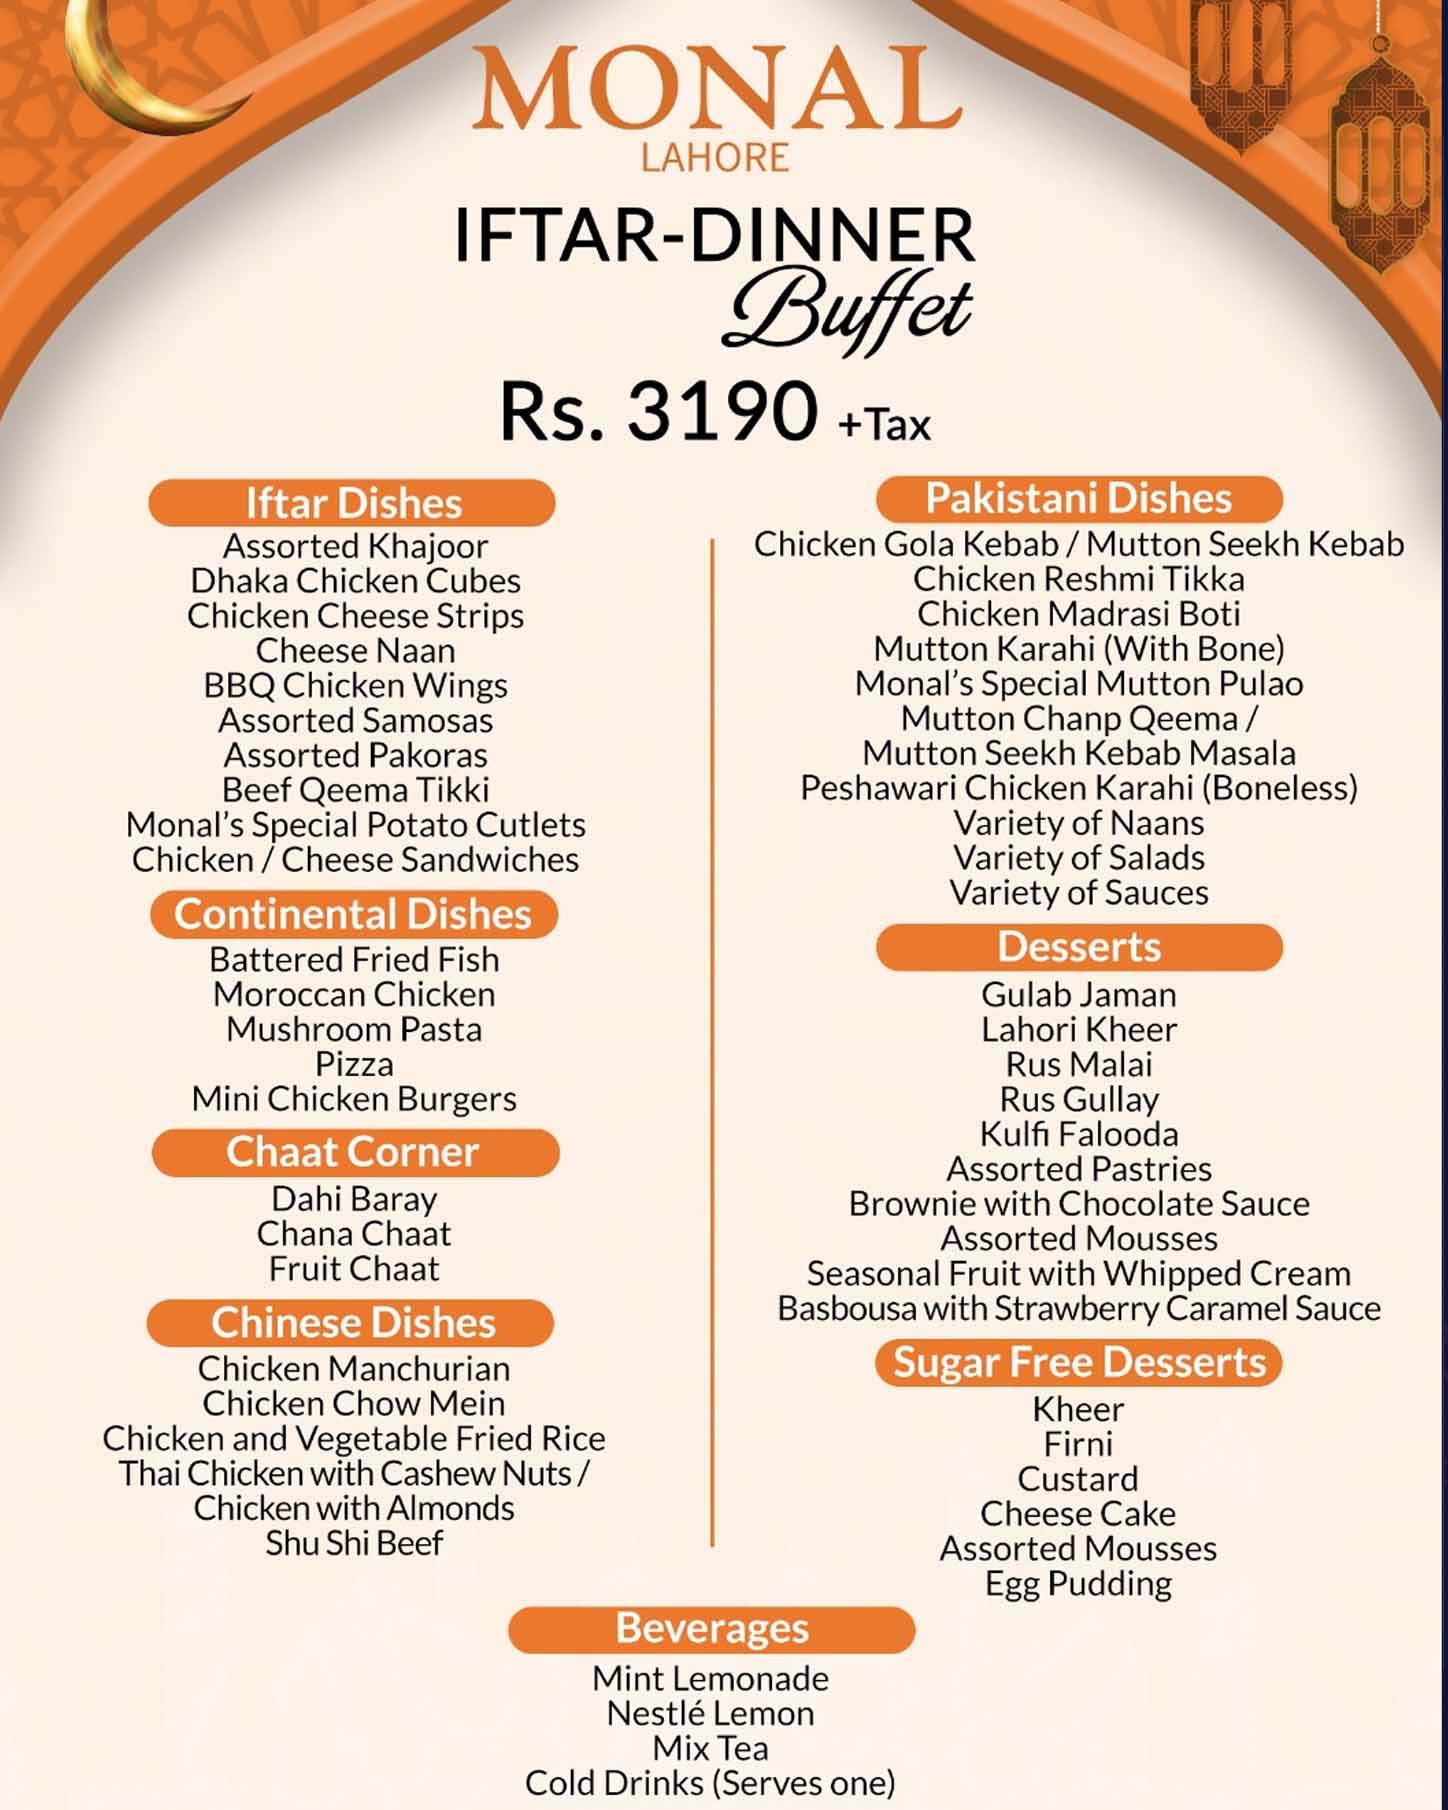 10 Most Expansive Iftari's in Lahore